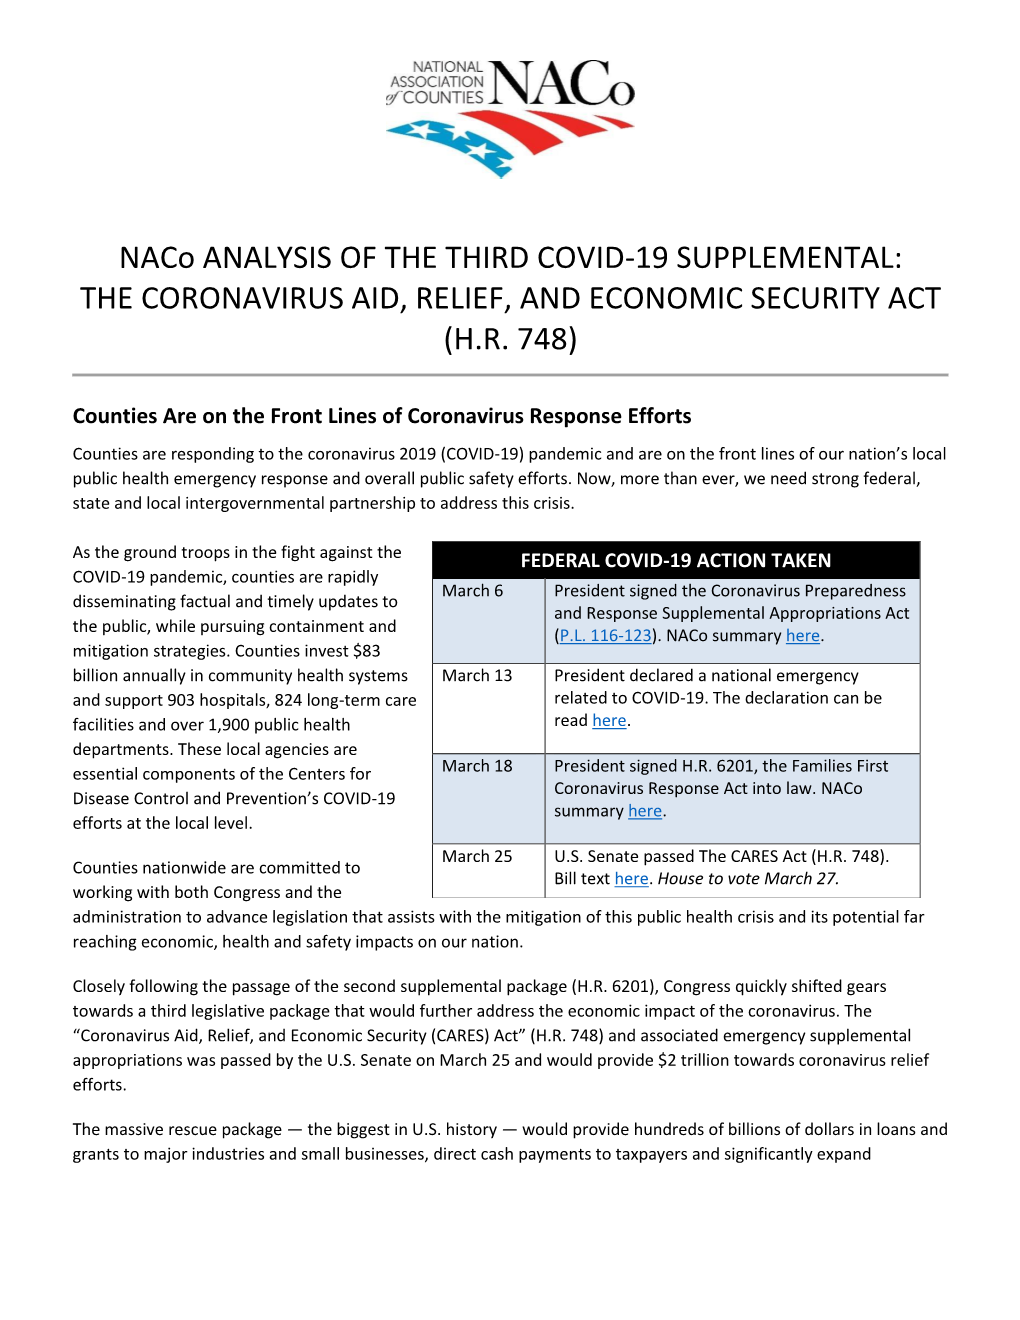 Naco ANALYSIS of the THIRD COVID-19 SUPPLEMENTAL: the CORONAVIRUS AID, RELIEF, and ECONOMIC SECURITY ACT (H.R